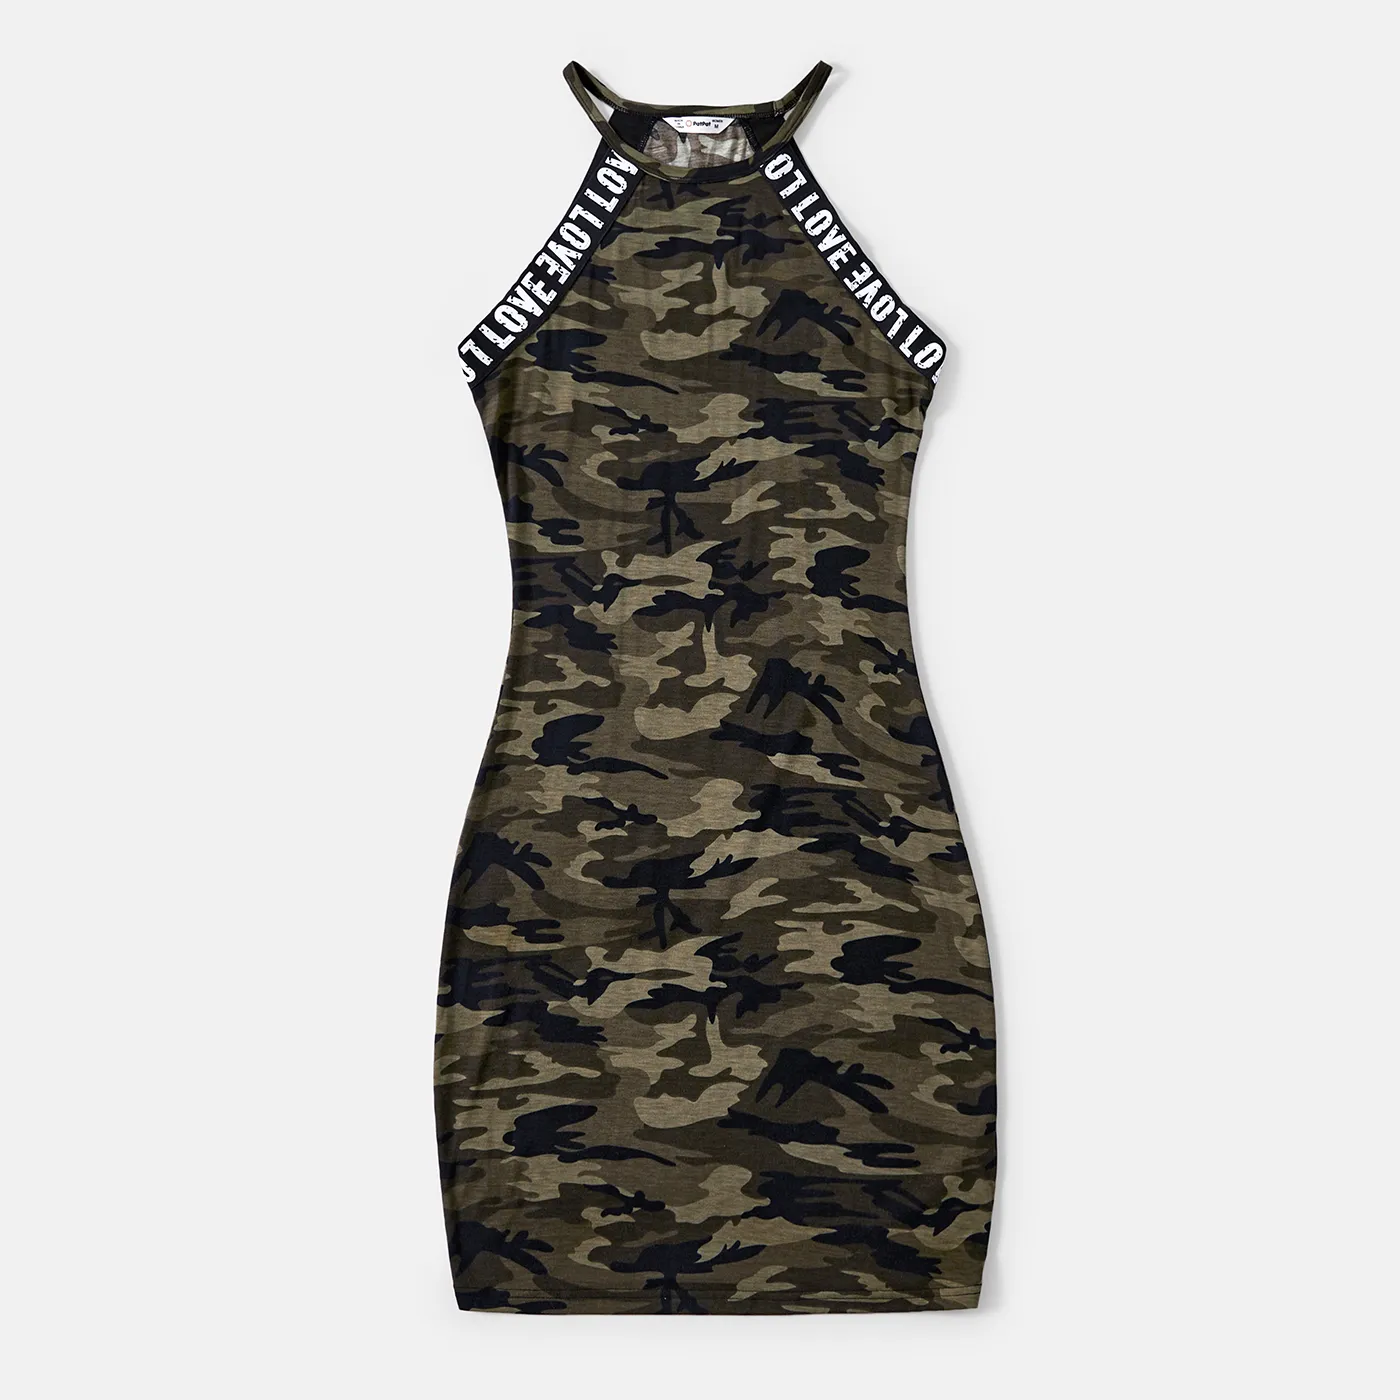 Family Matching Letter Design Camouflage Halter Neck Sleeveless Bodycon Dresses and Cotton Short-sle